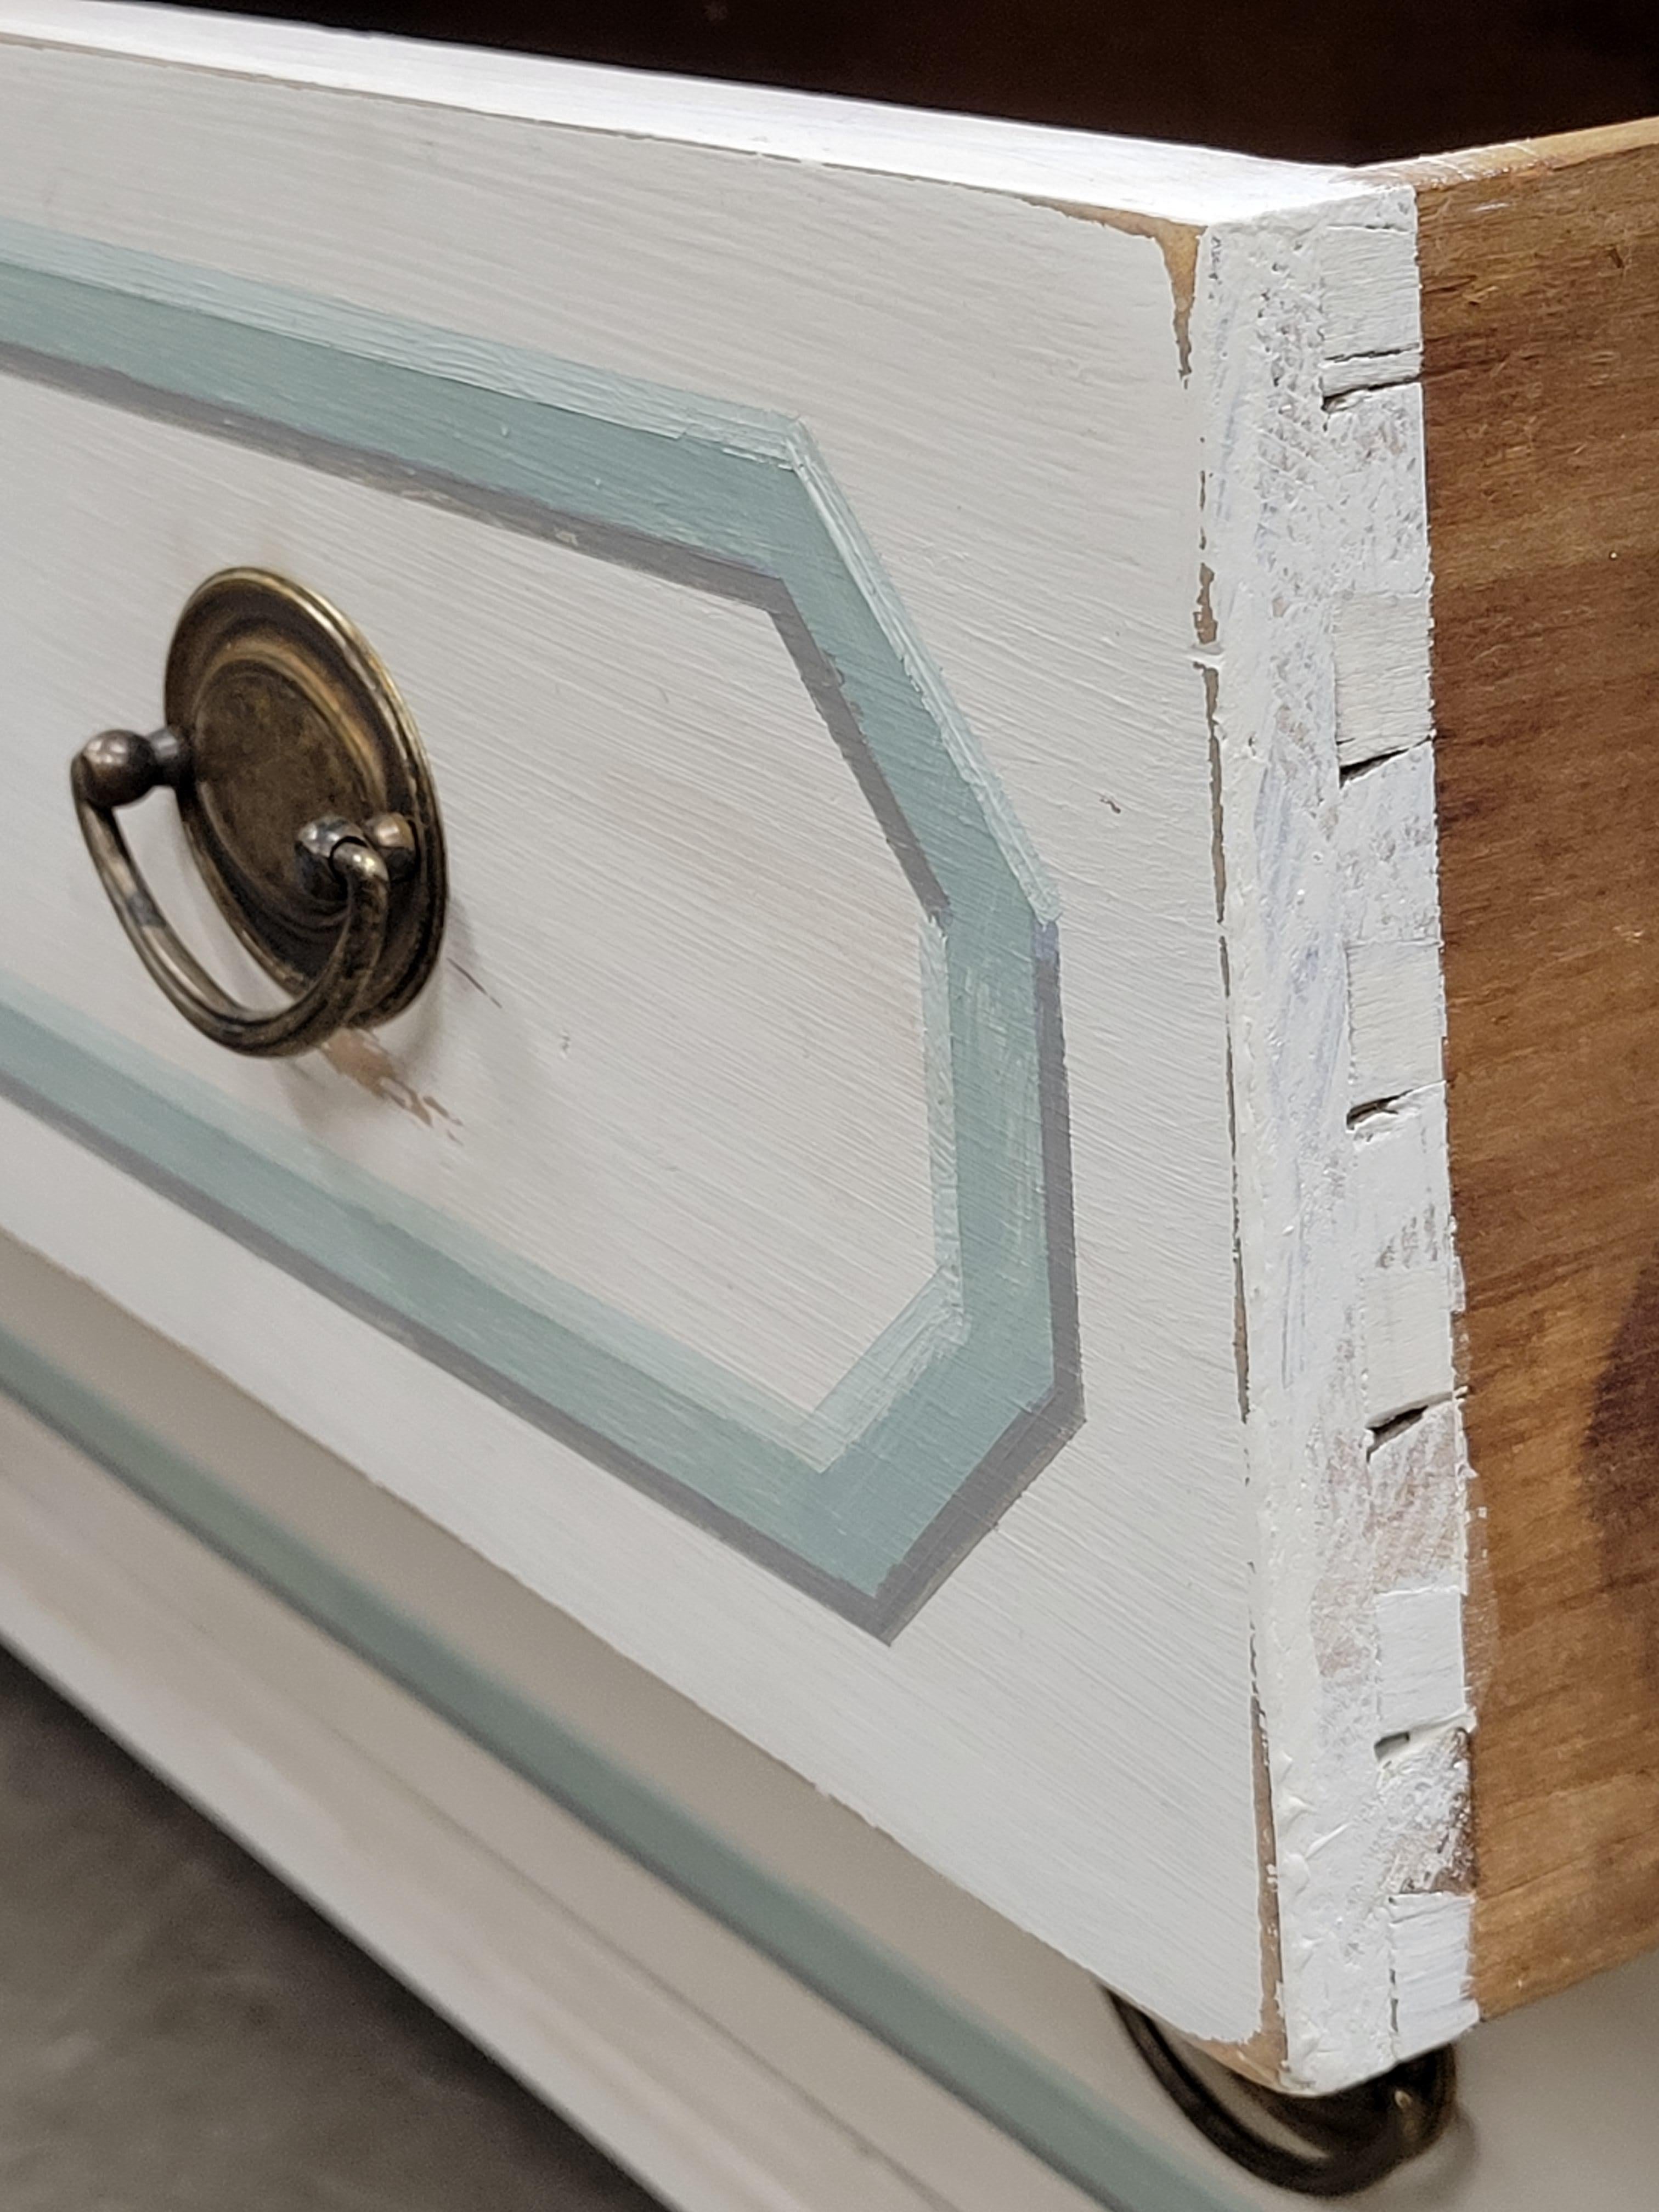 Brass Antique Pine Dresser Painted White With Aqua and Gray Trompe l'Oiel French Line 